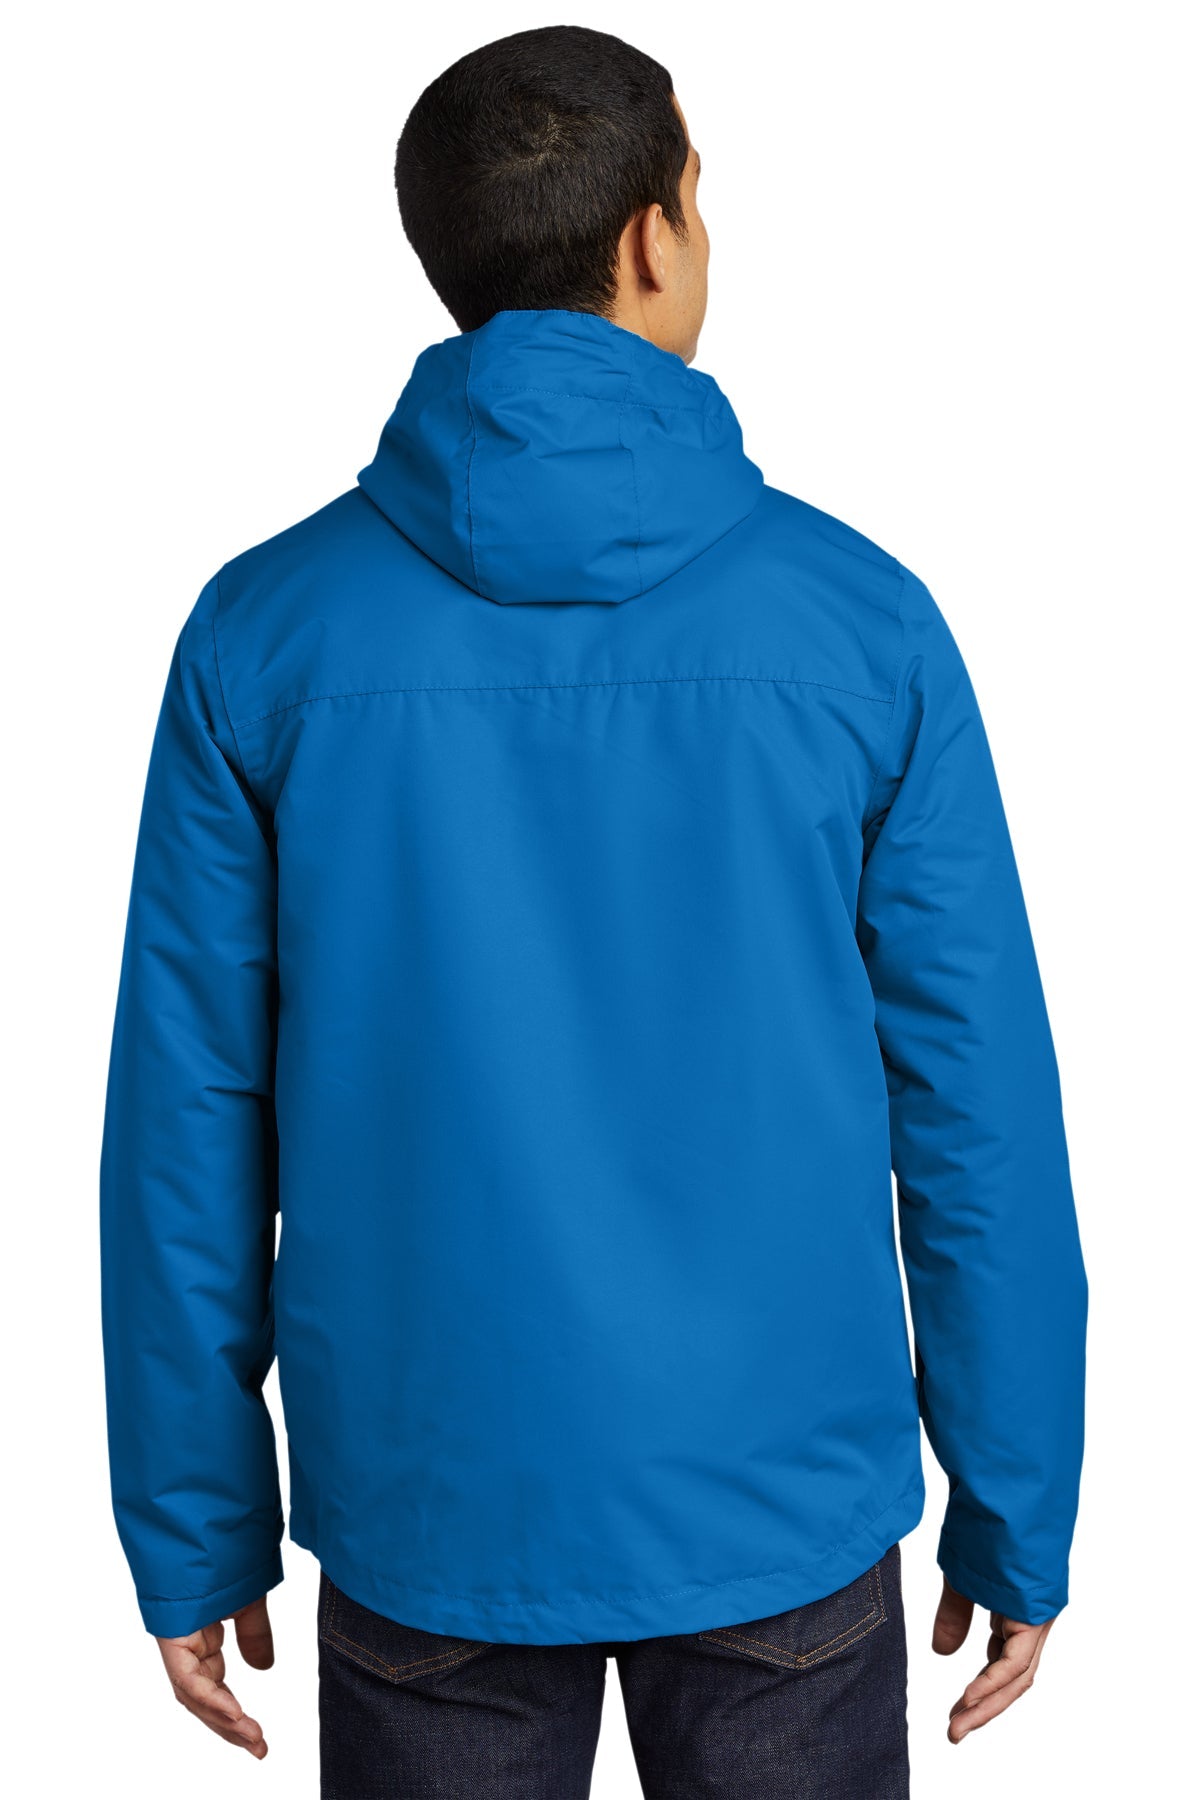 Port Authority All-Conditions Branded Jackets, Direct Blue